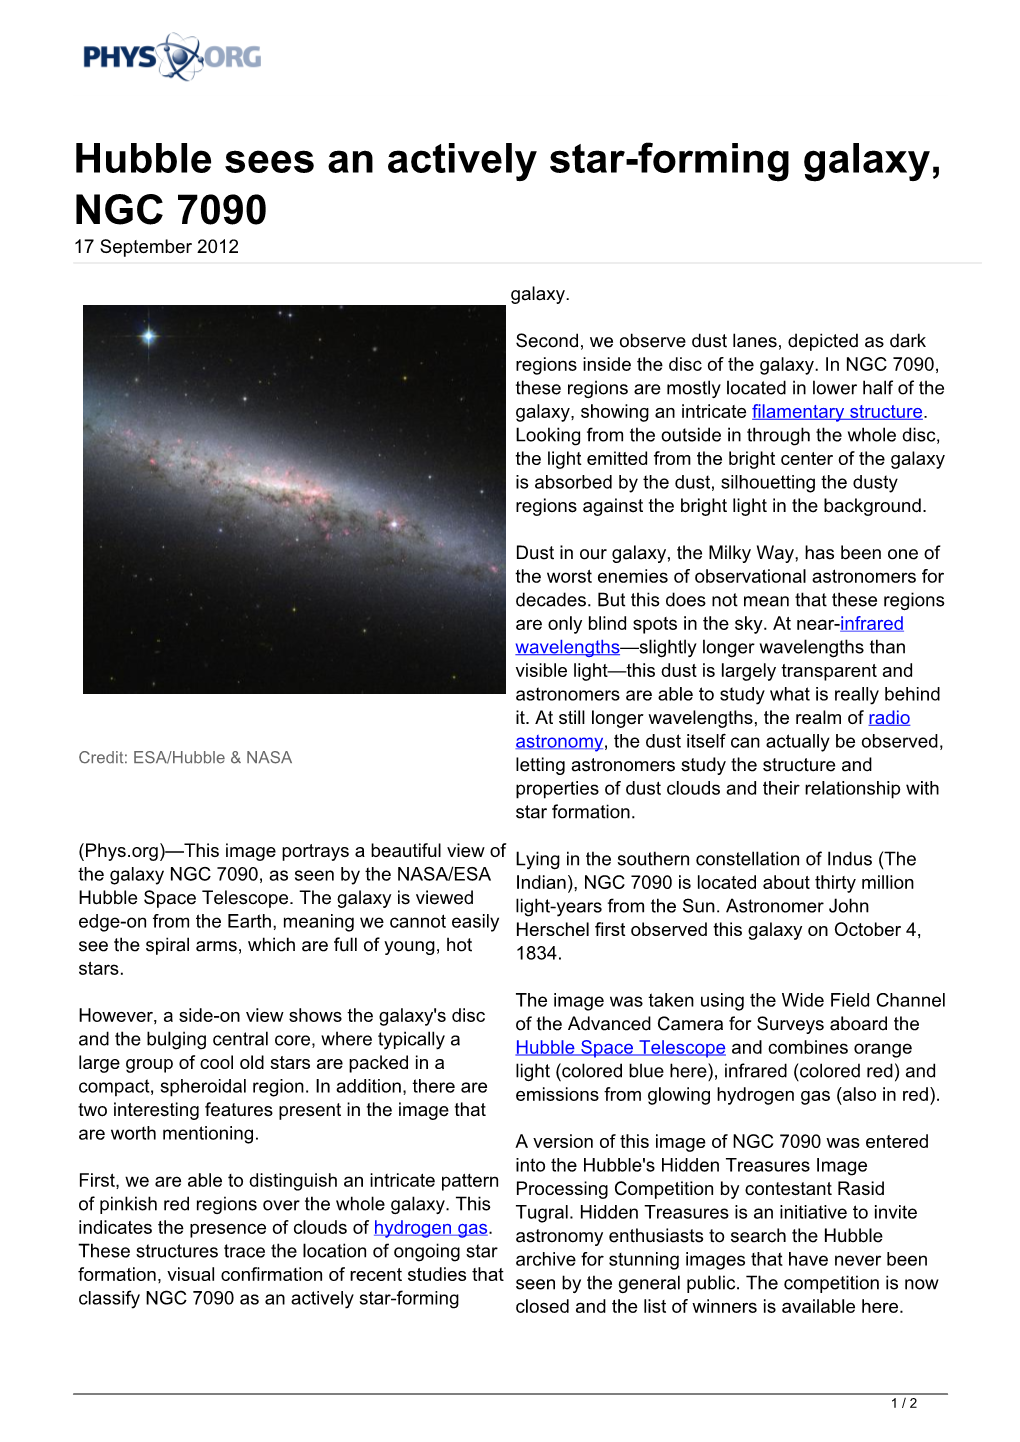 Hubble Sees an Actively Star-Forming Galaxy, NGC 7090 17 September 2012